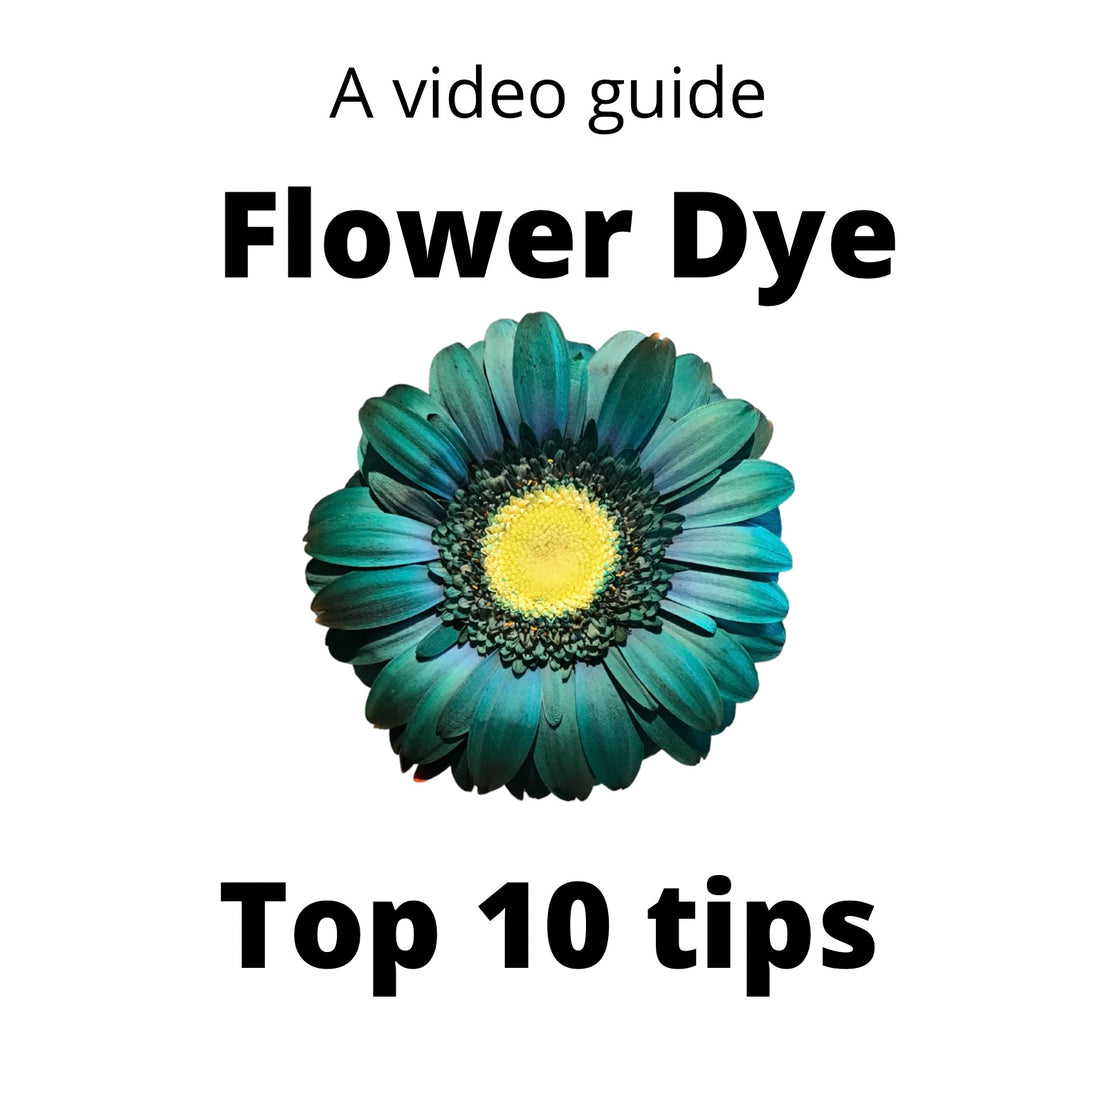 Top 10 tips for successful flower dyeing